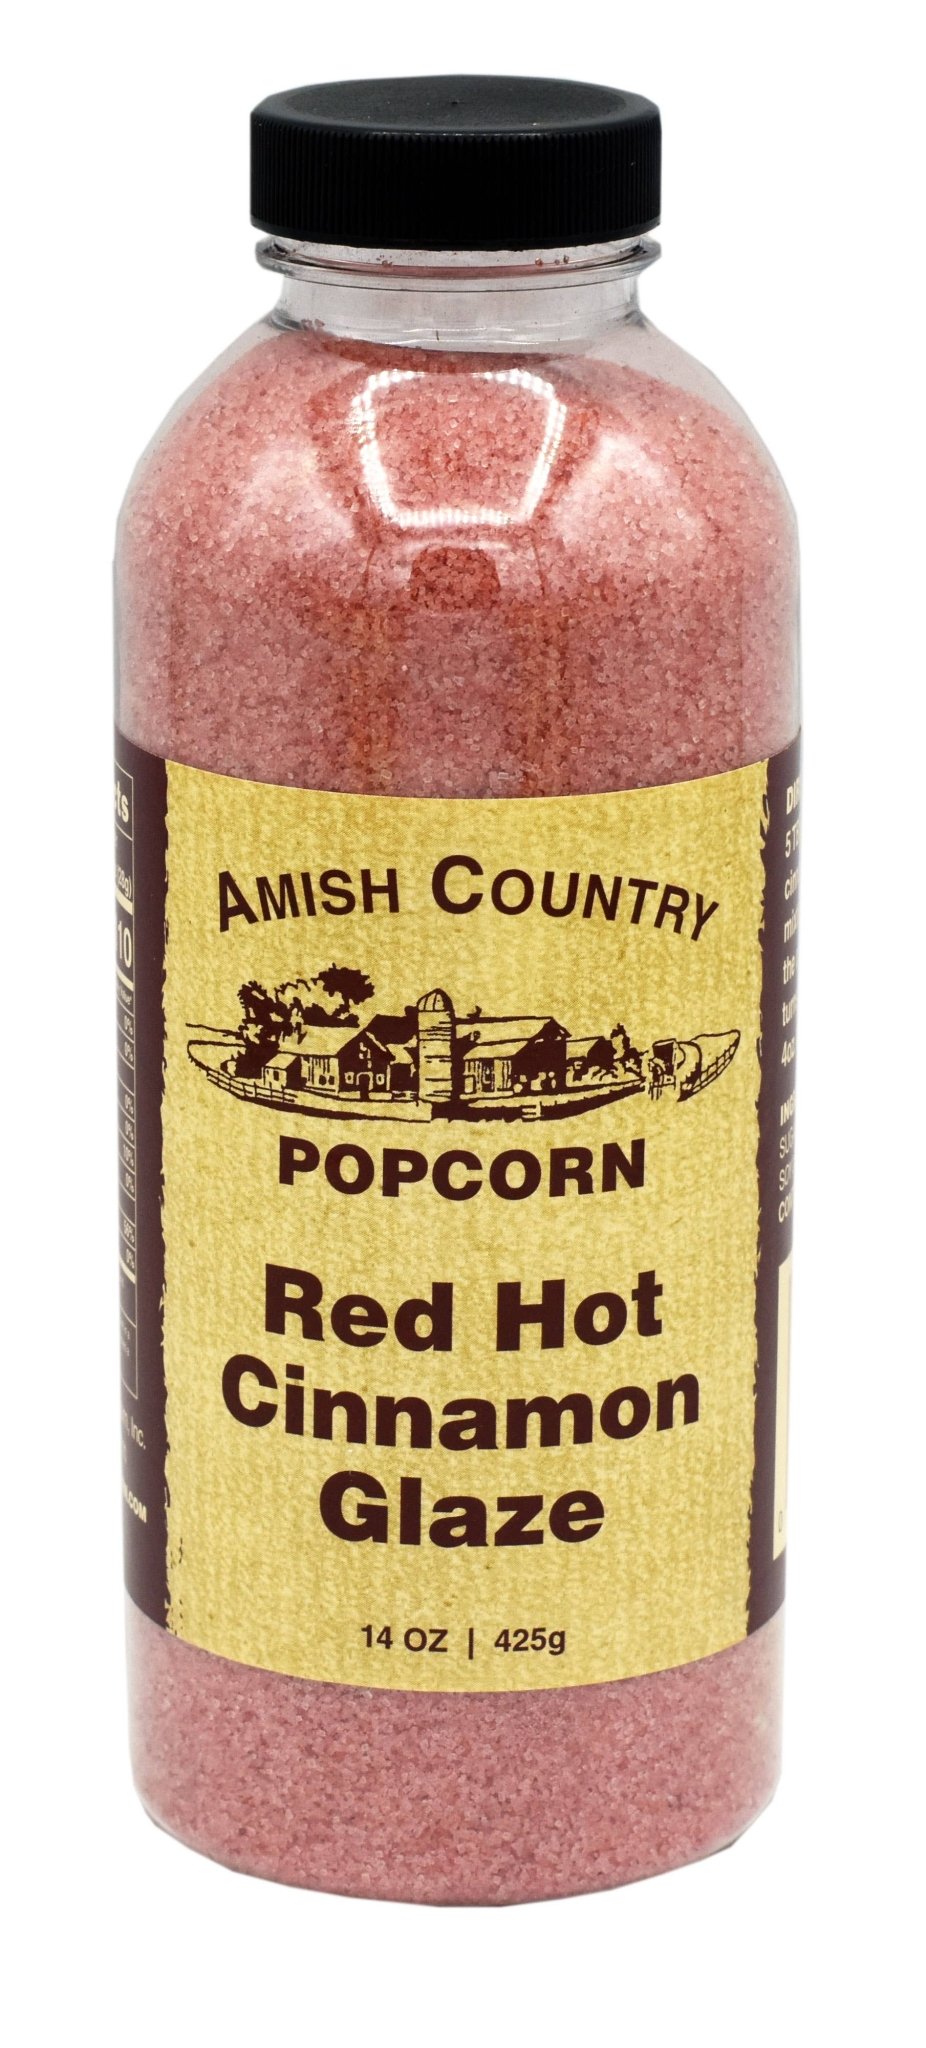 Amish Country Popcorn - 14 oz. Bottle of Red Hot Cinnamon Glaze - Pacific Flyway Supplies